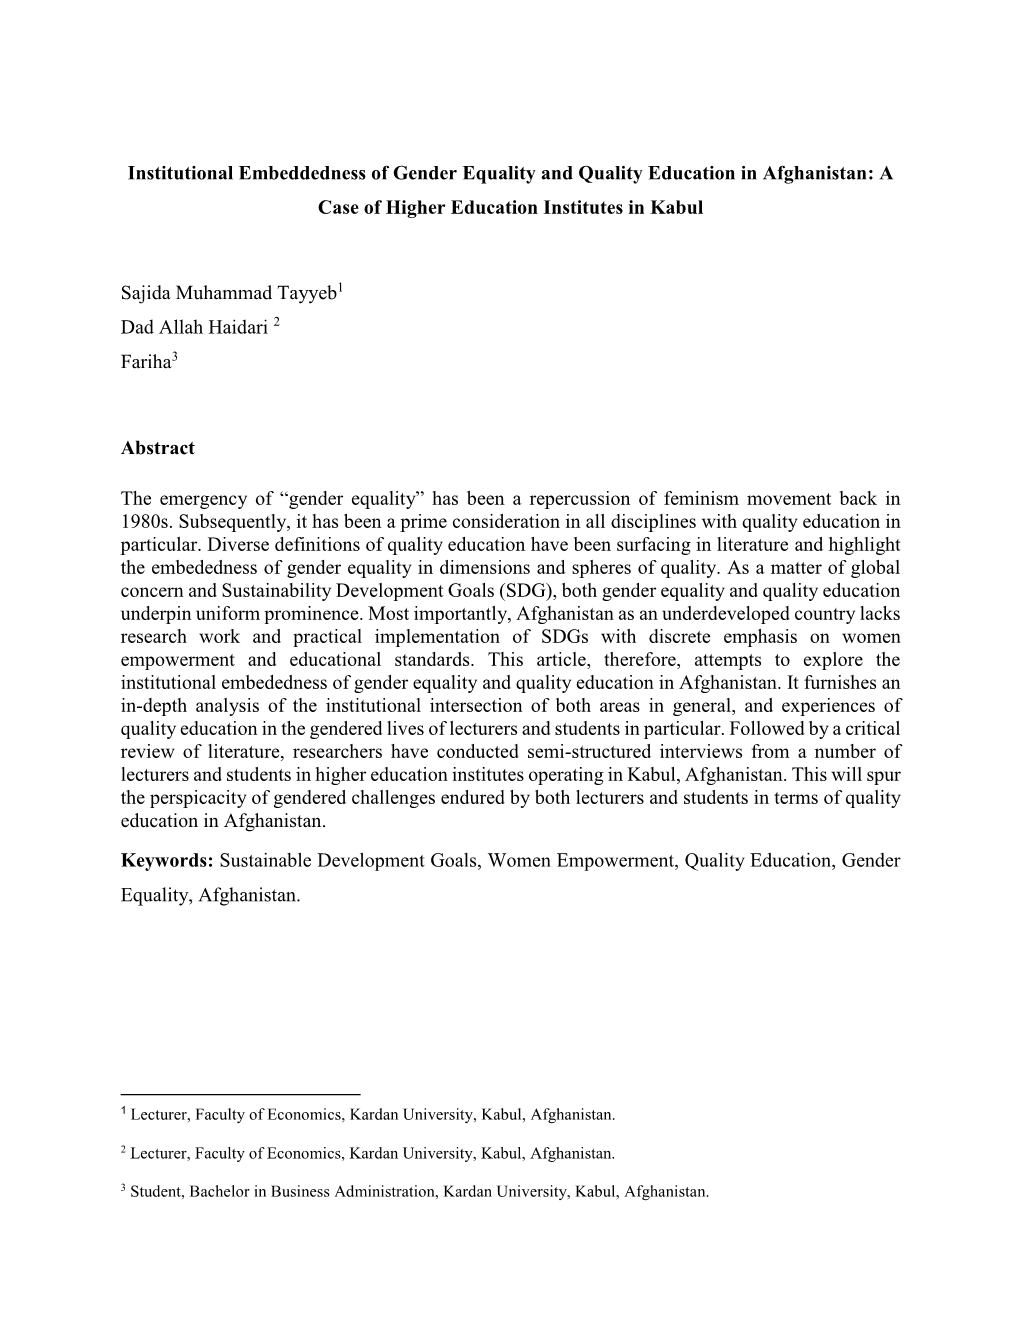 Institutional Embeddedness of Gender Equality and Quality Education in Afghanistan: a Case of Higher Education Institutes in Kabul